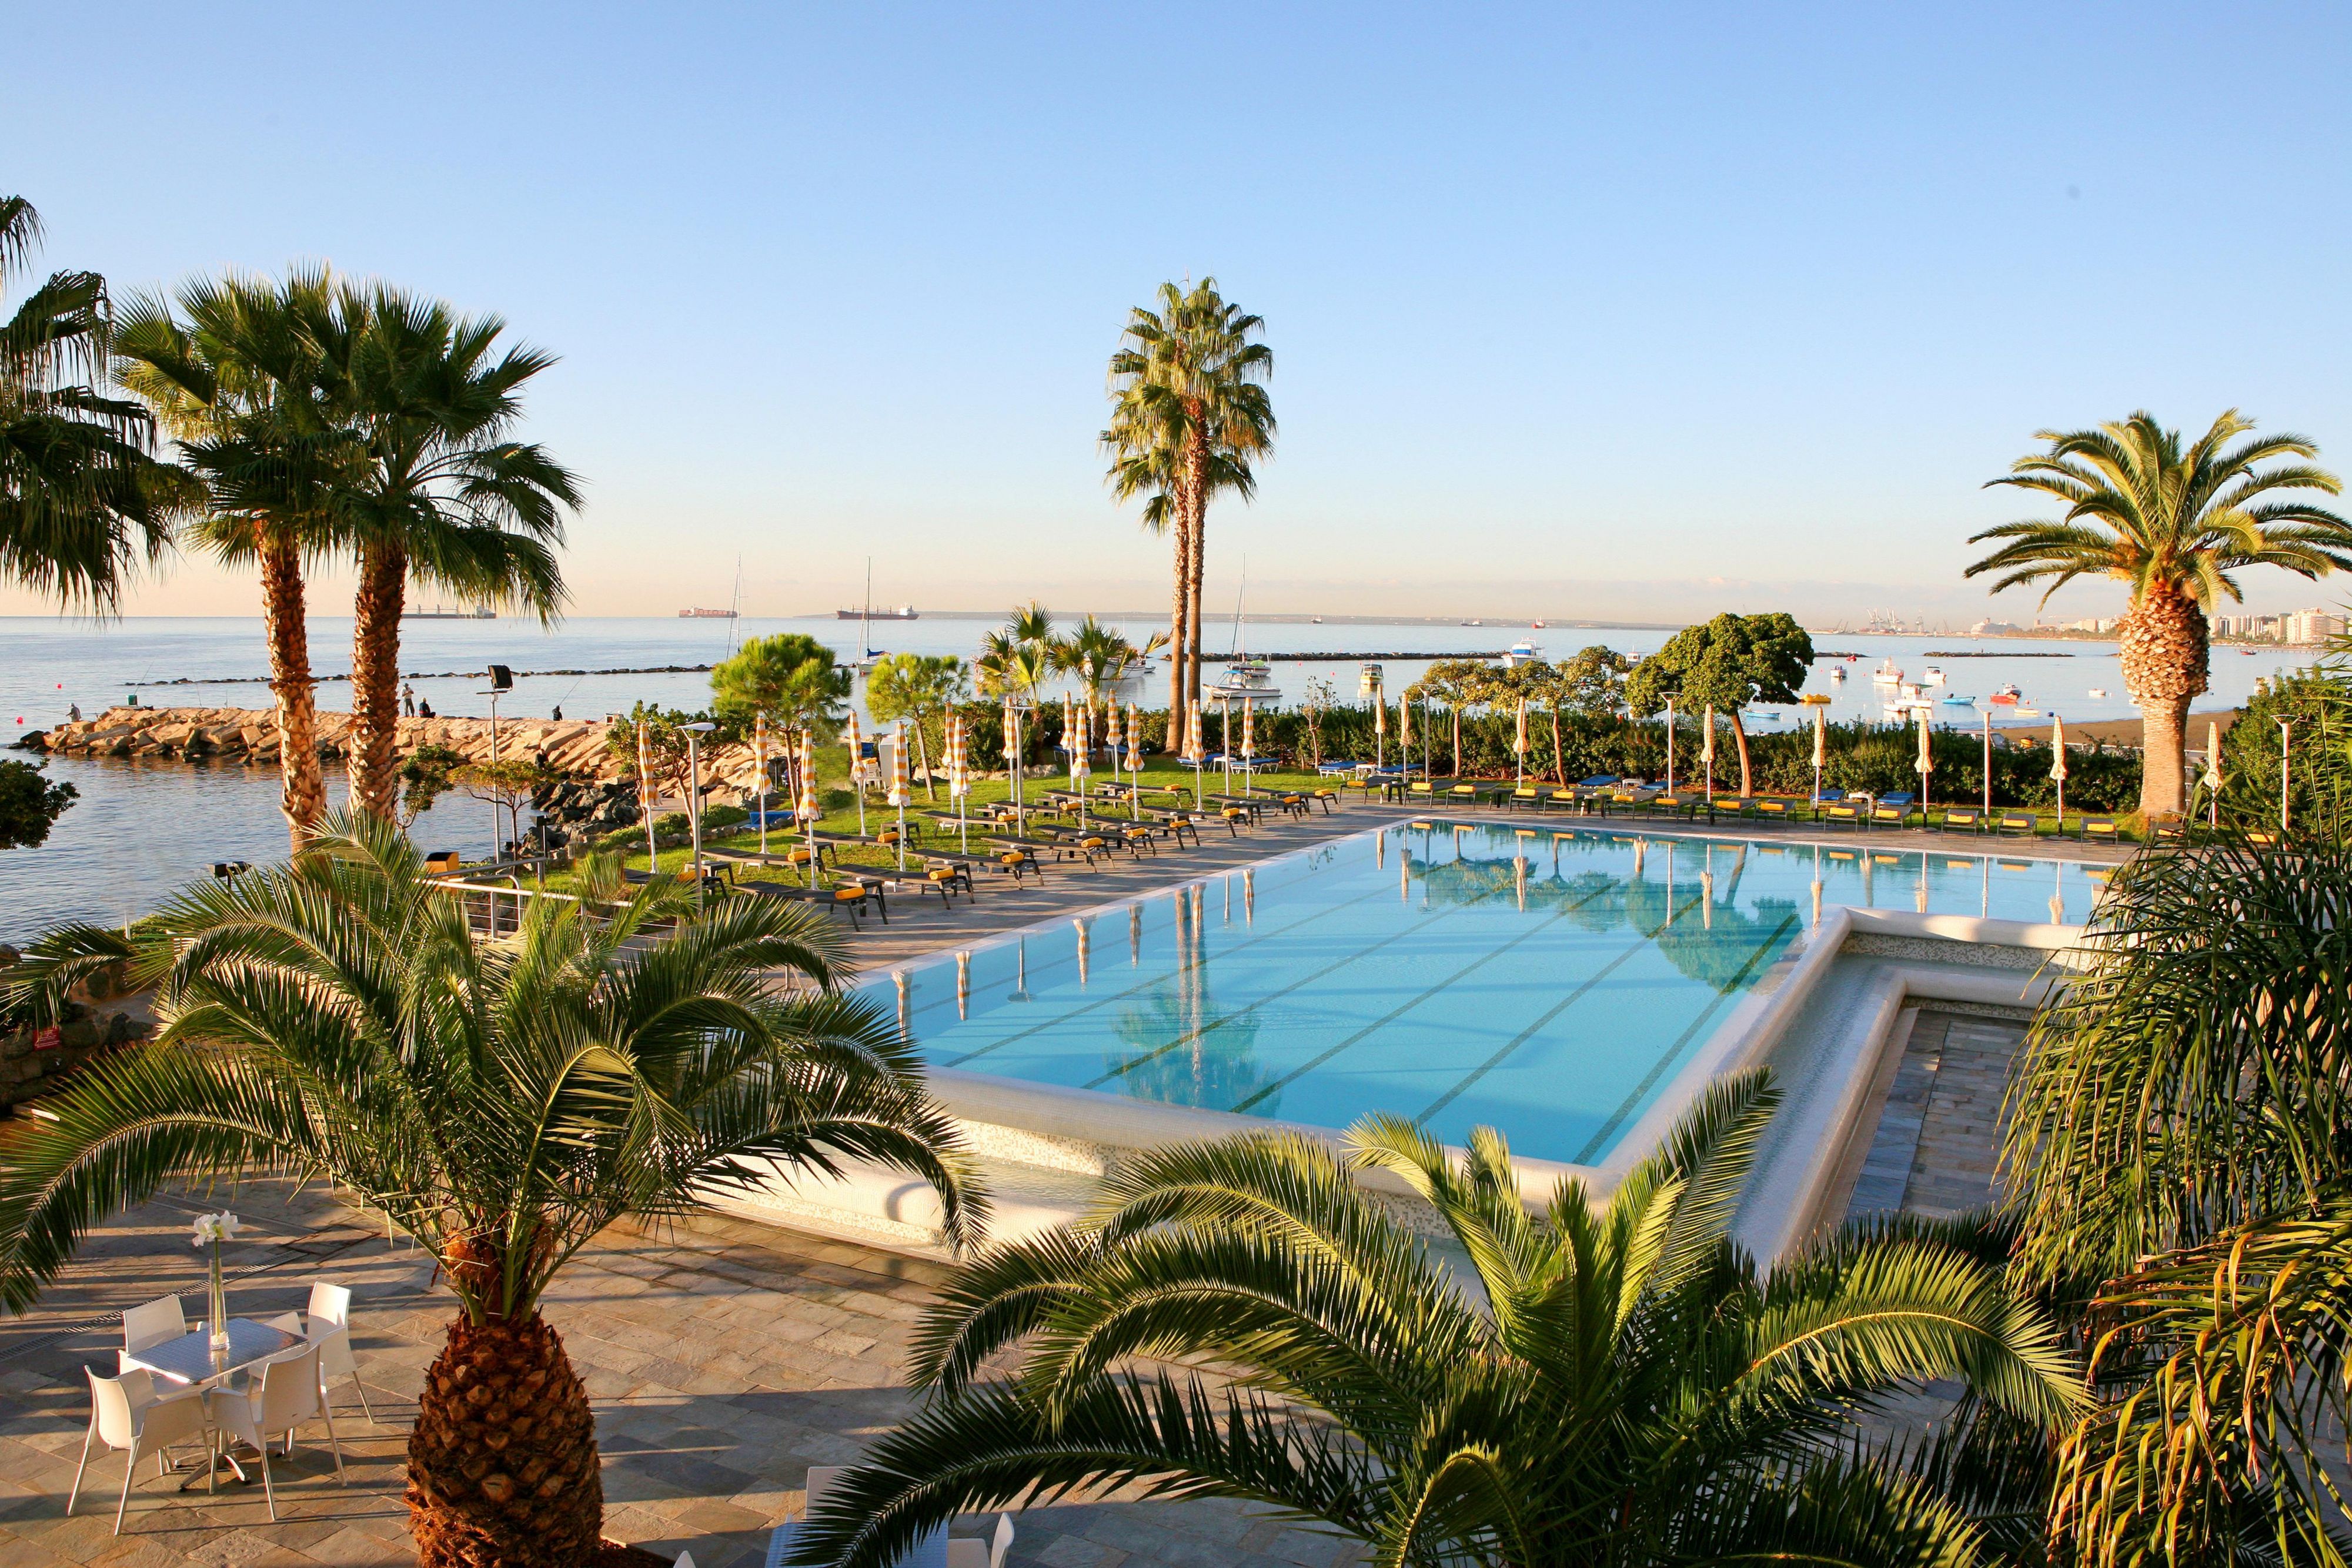 Refresh yourself in our overflow outdoor pool by the sea.